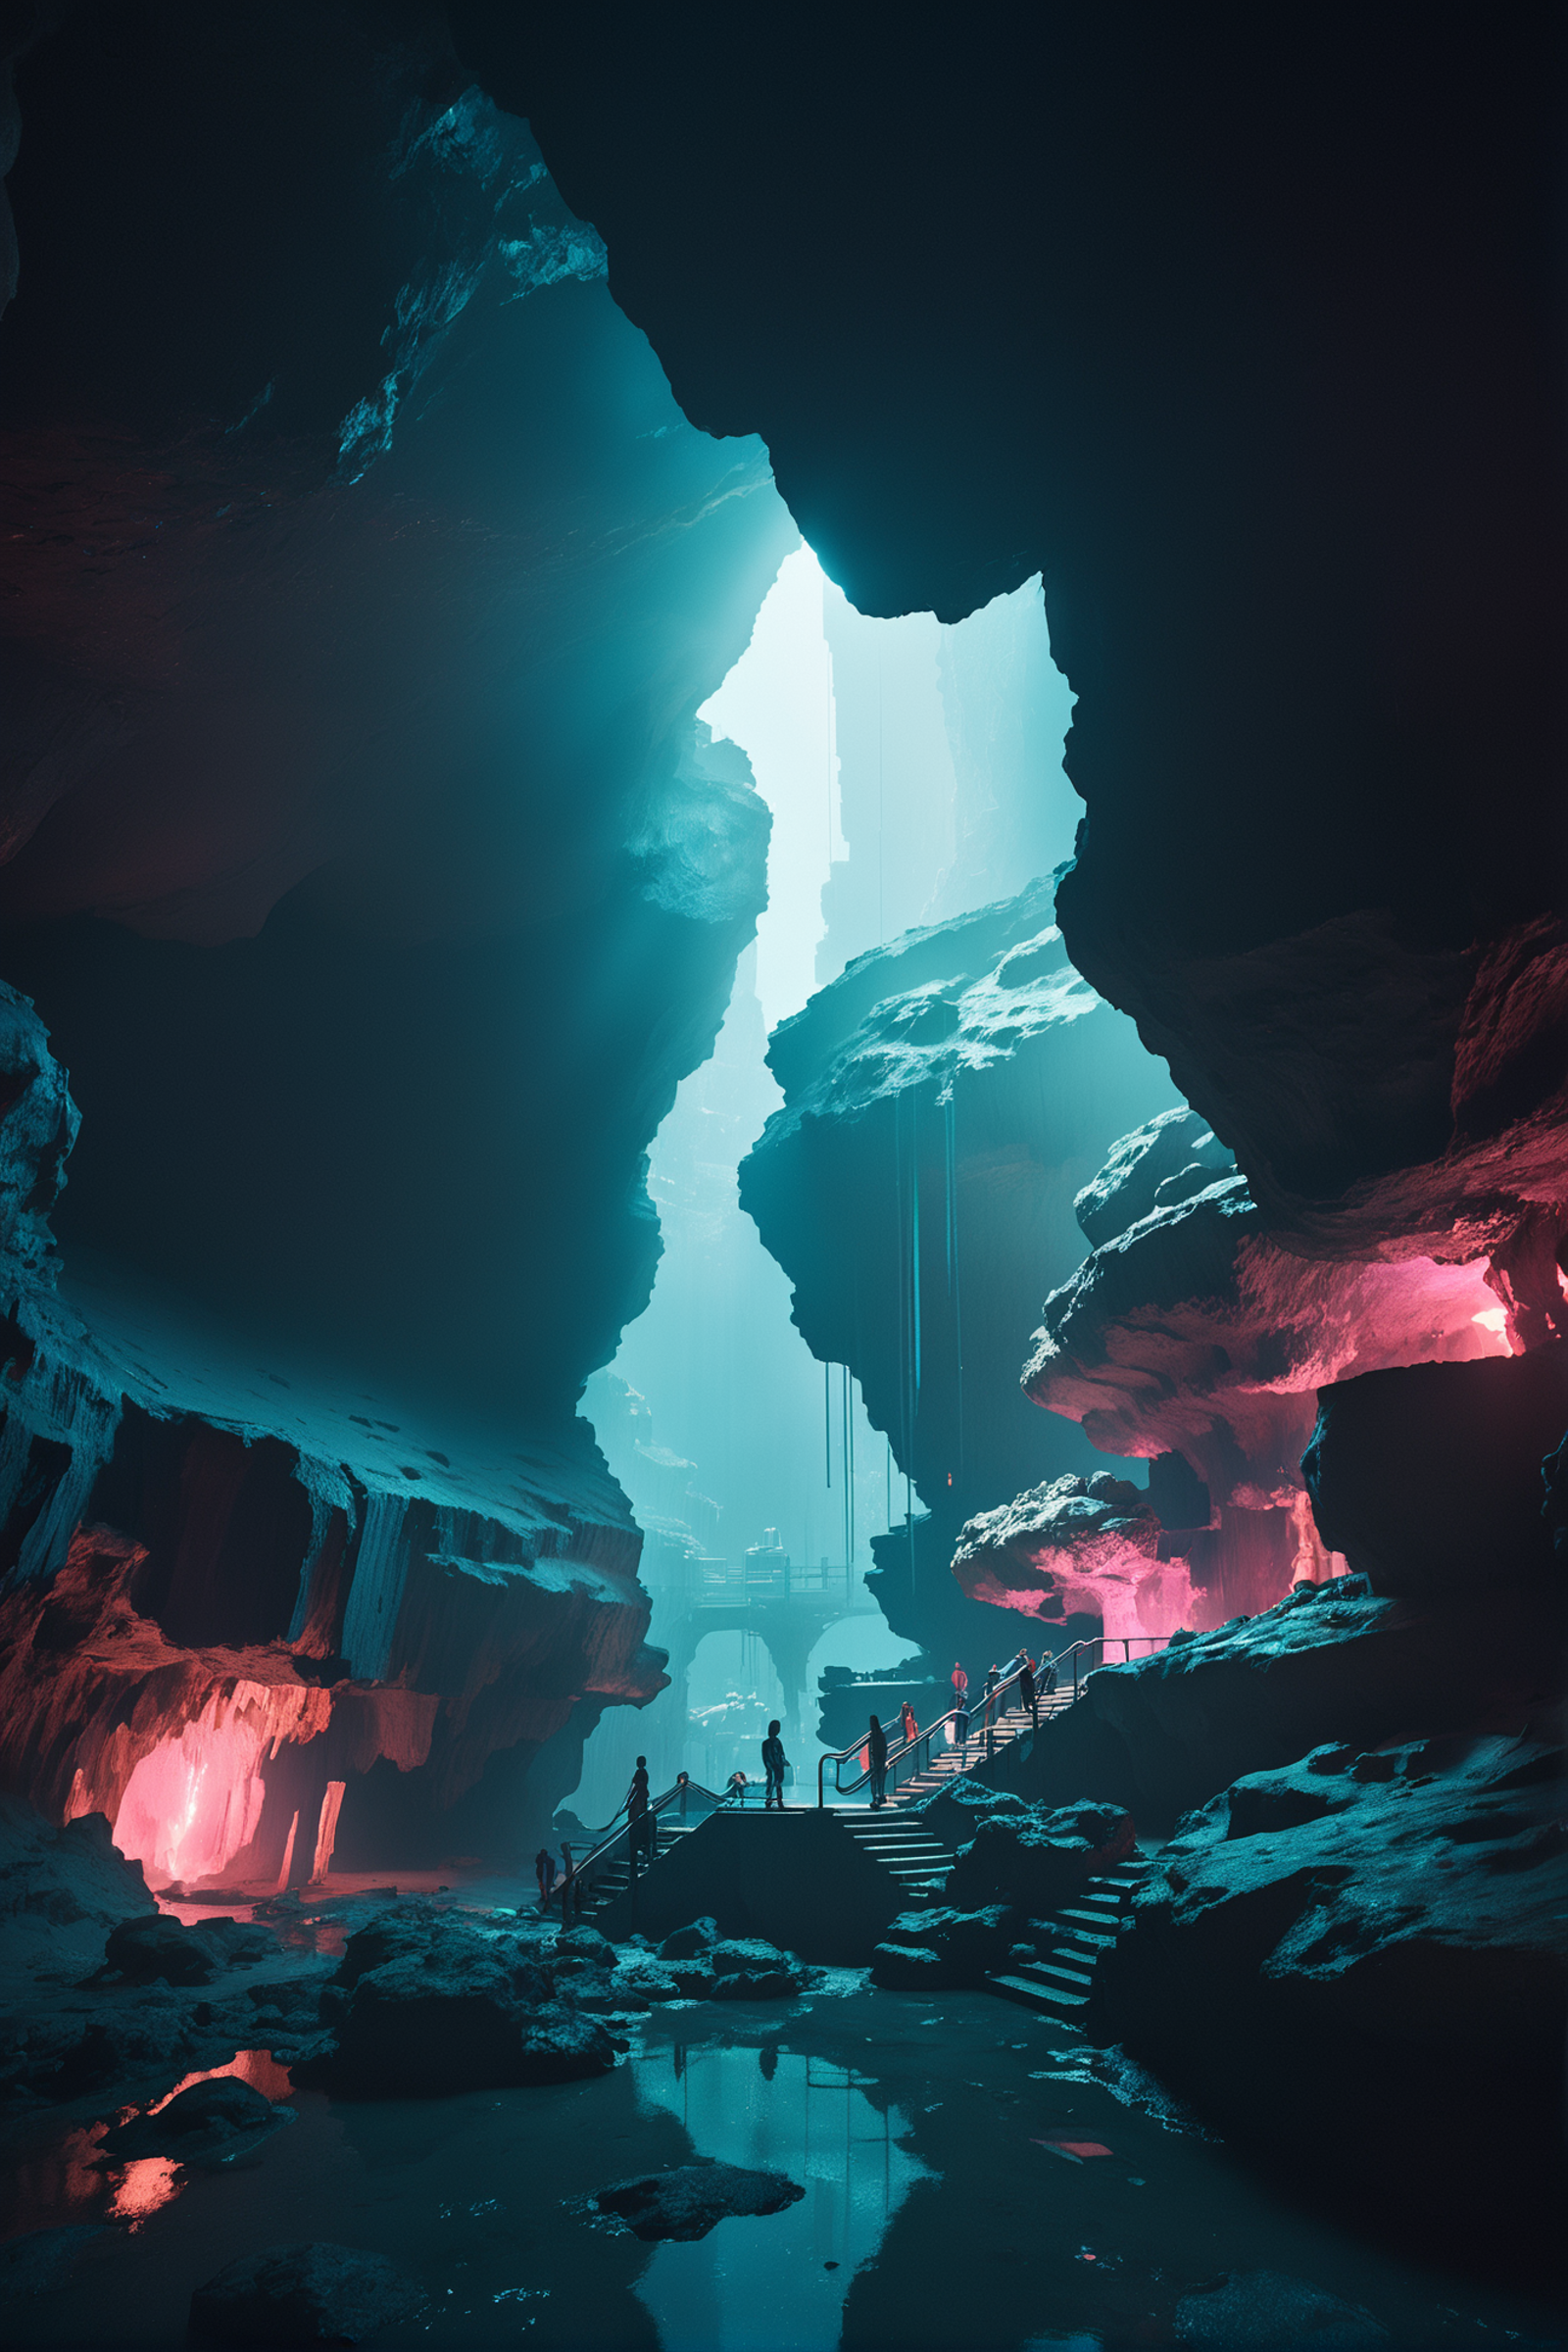 A group of people exploring a cave filled with stalactites and stalagmites.